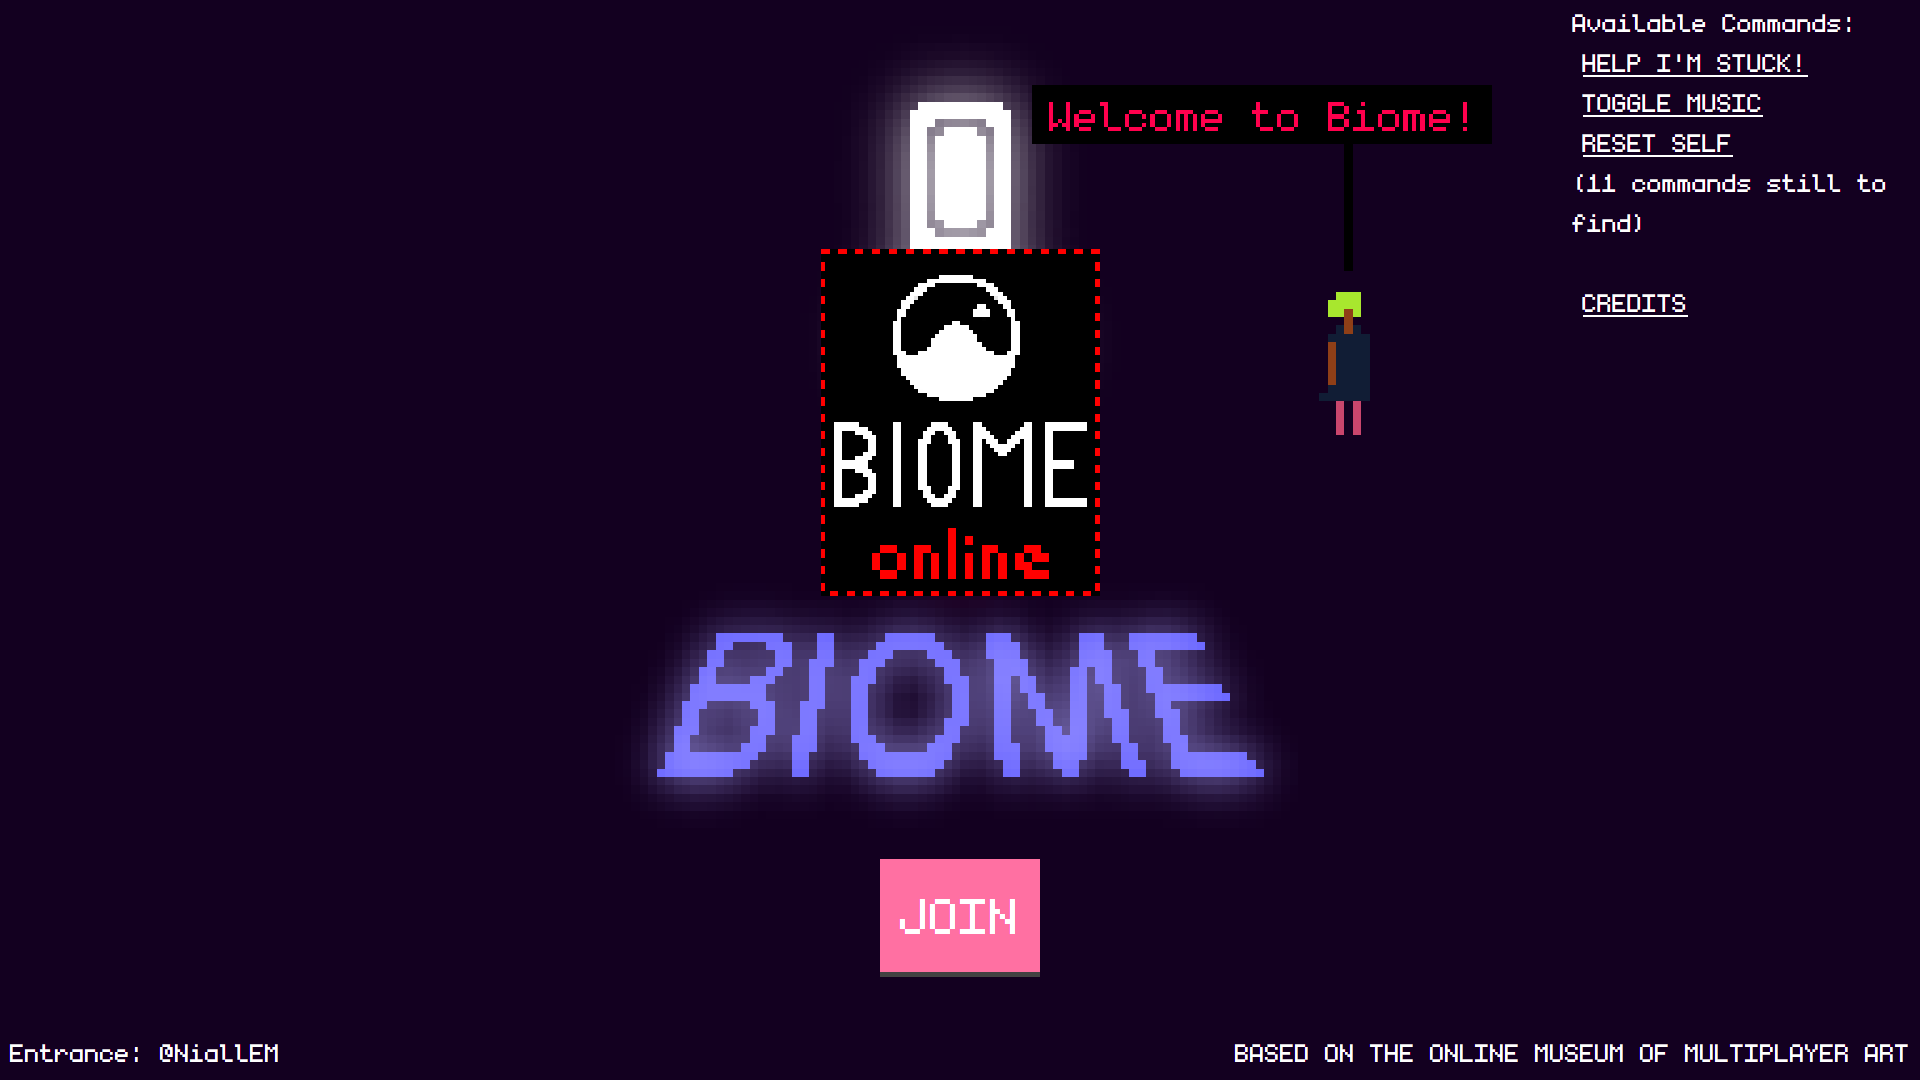 Screenshot of the gallery as it appears before you login/join. There is a logo that says 'Biome Online', a Join button, an NPC saying 'Welcome to Biome!'', and a glowing white door.